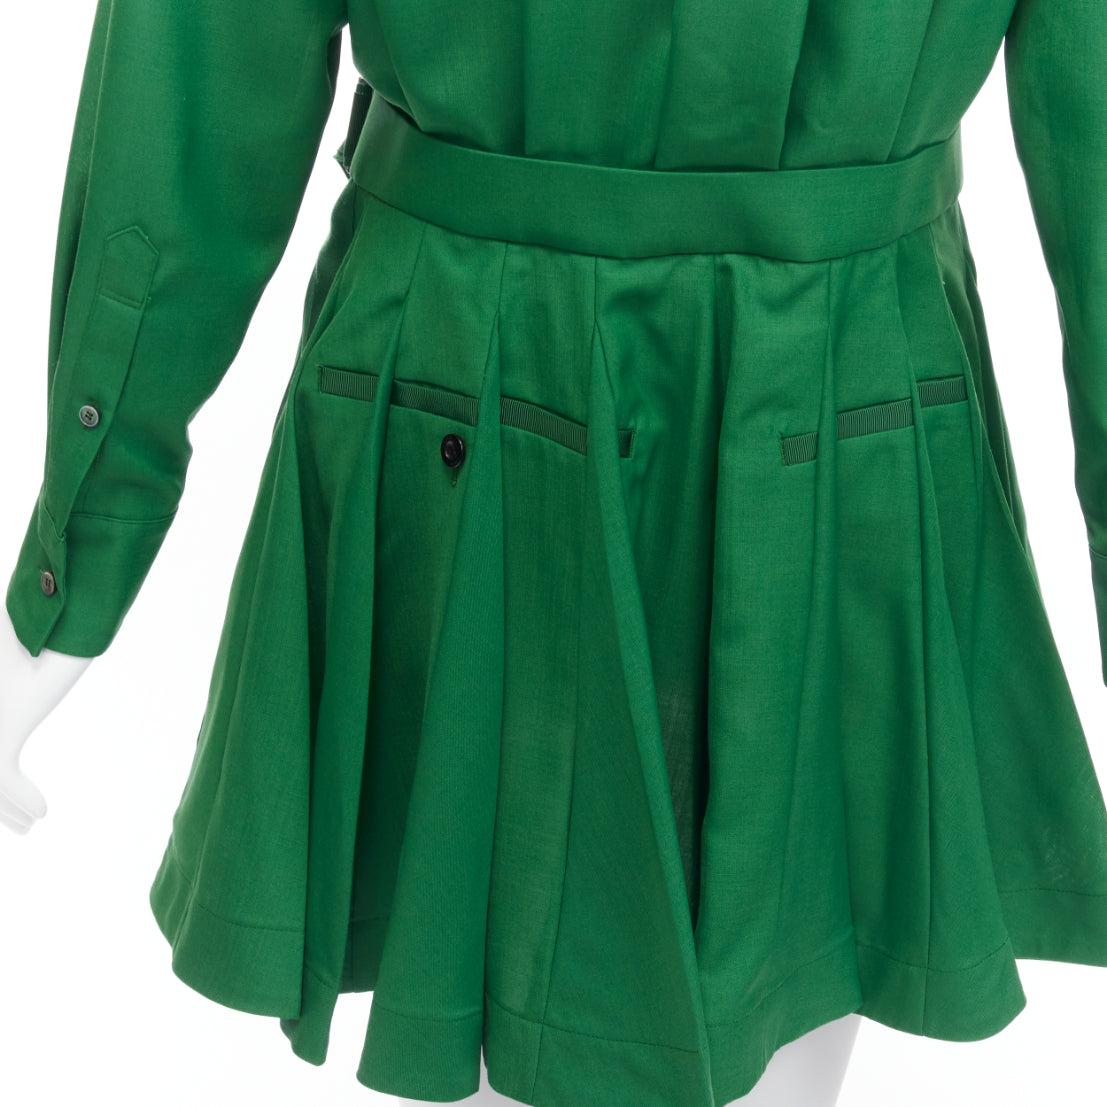 SACAI 2022 cream satin collar placket green belted pleated layered skirt shirt dress JP1 S
Reference: AAWC/A00512
Brand: Sacai
Designer: Chitose Abe
Collection: 2022
Material: Polyester, Wool
Color: Green, Cream
Pattern: Solid
Closure: Belt
Extra